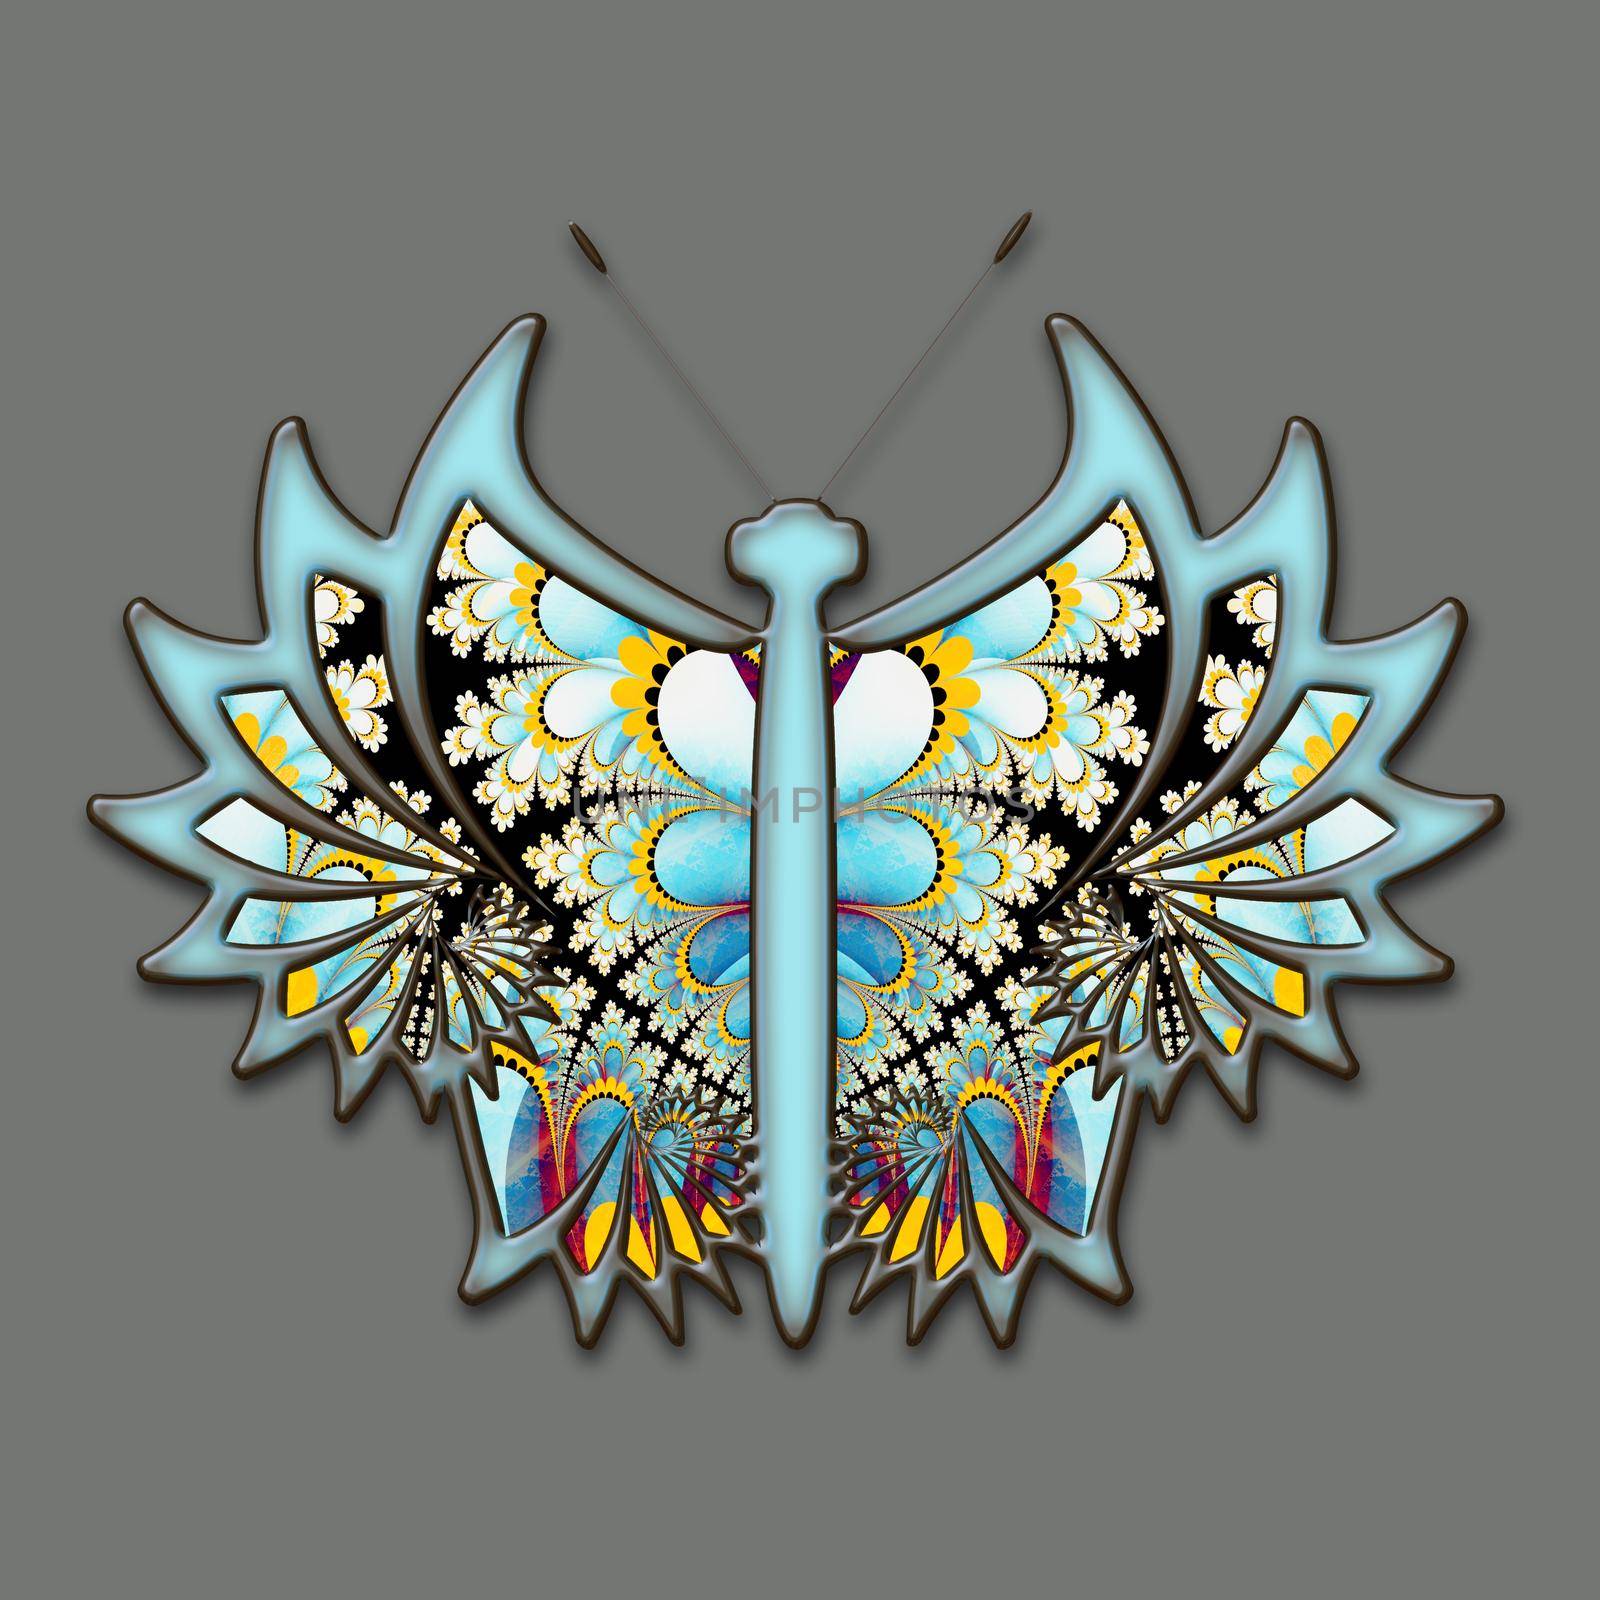 3D illustration of colorful butterfly by stocklady